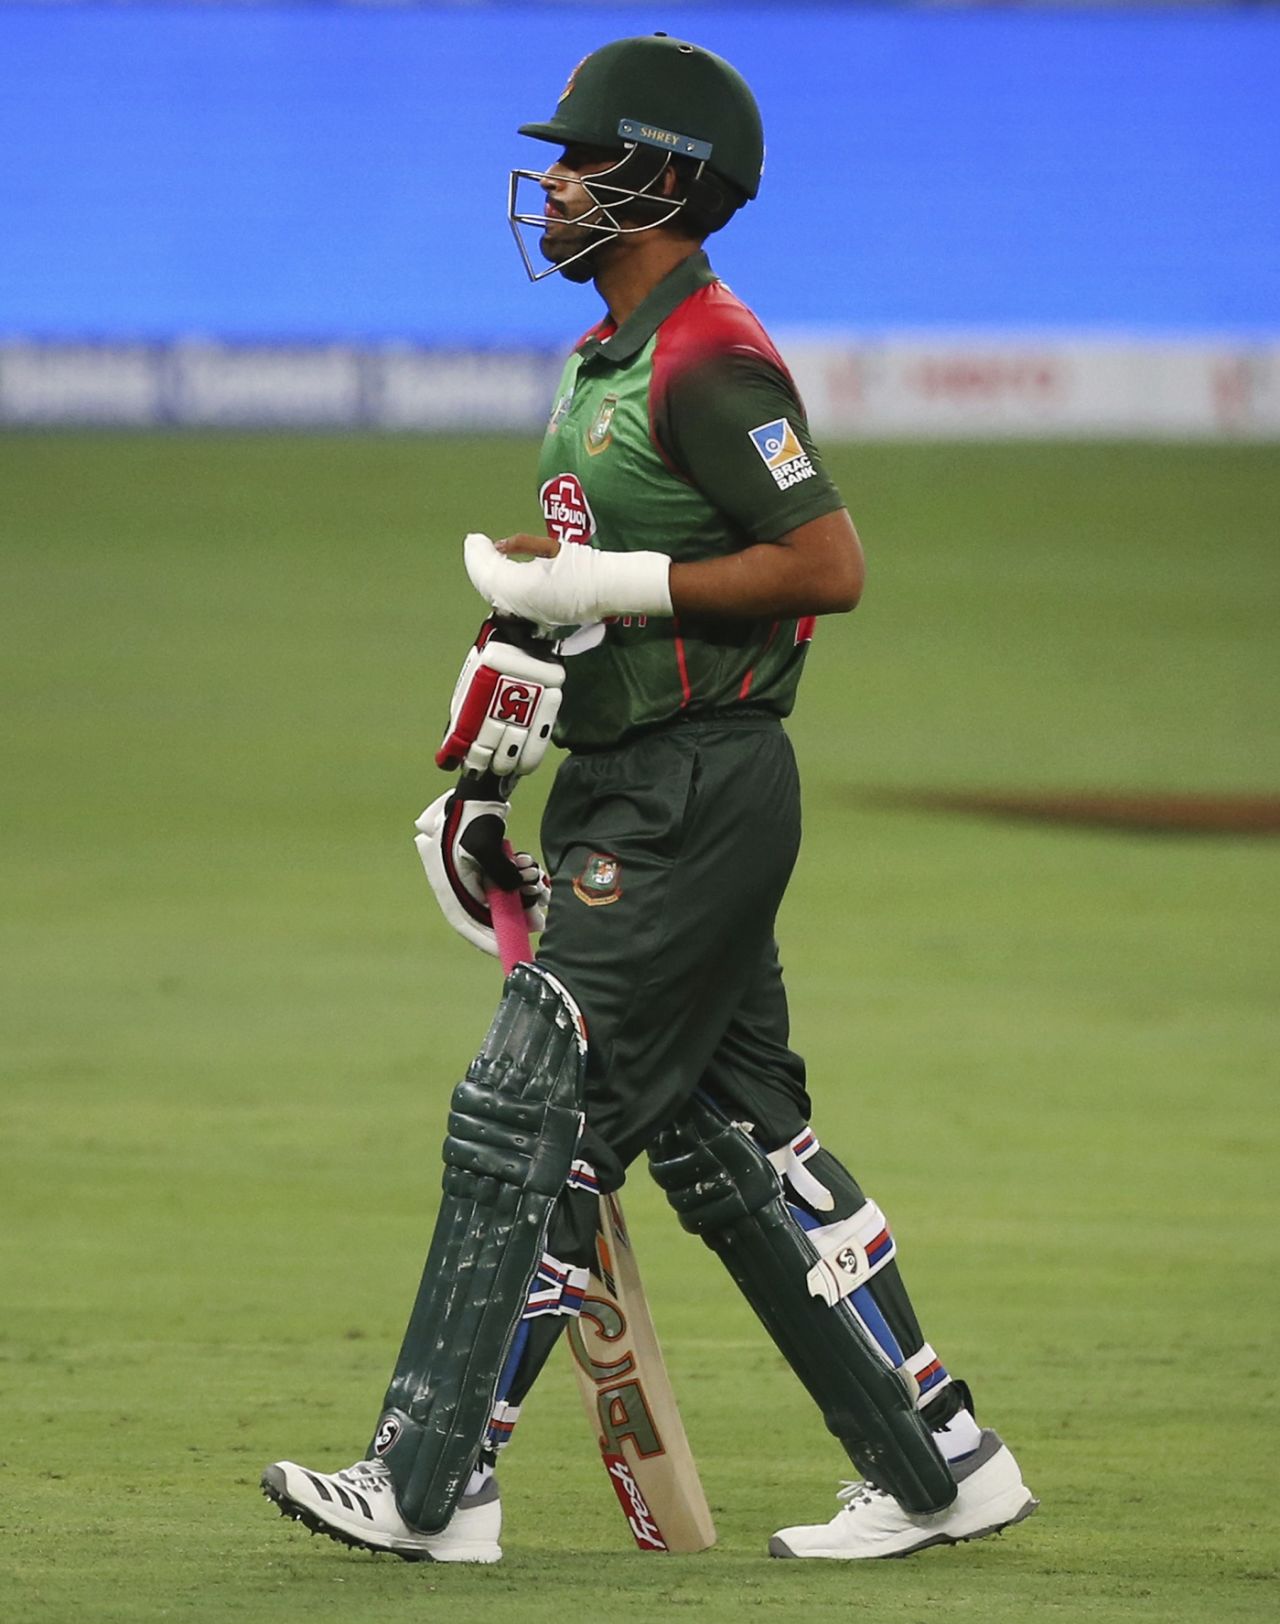 Tamim Iqbal comes out to bat with a fractured left hand, Sri Lanka v Bangladesh, Asia Cup 2018, Dubai, September 15, 2018